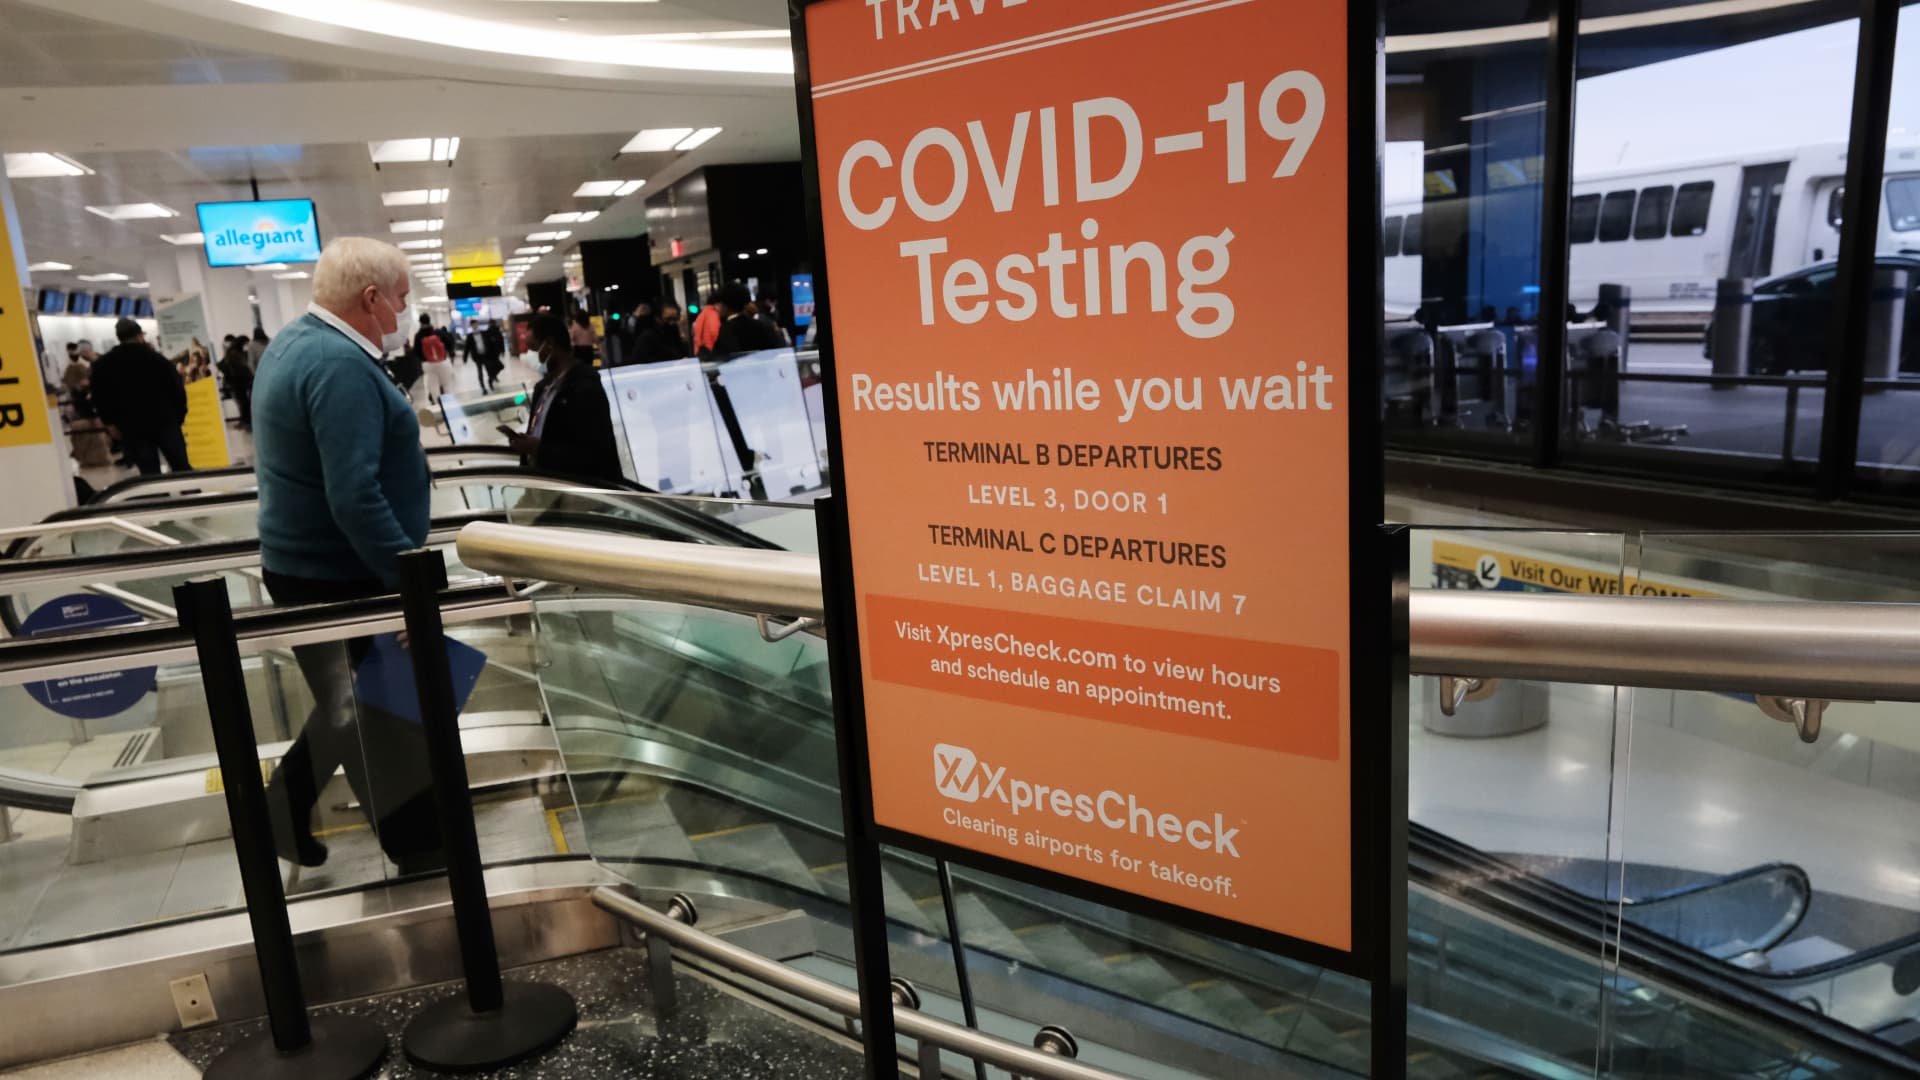 A COVID-19 testing facility is advertised at Newark Liberty International Airport on November 30, 2021 in Newark, New Jersey.